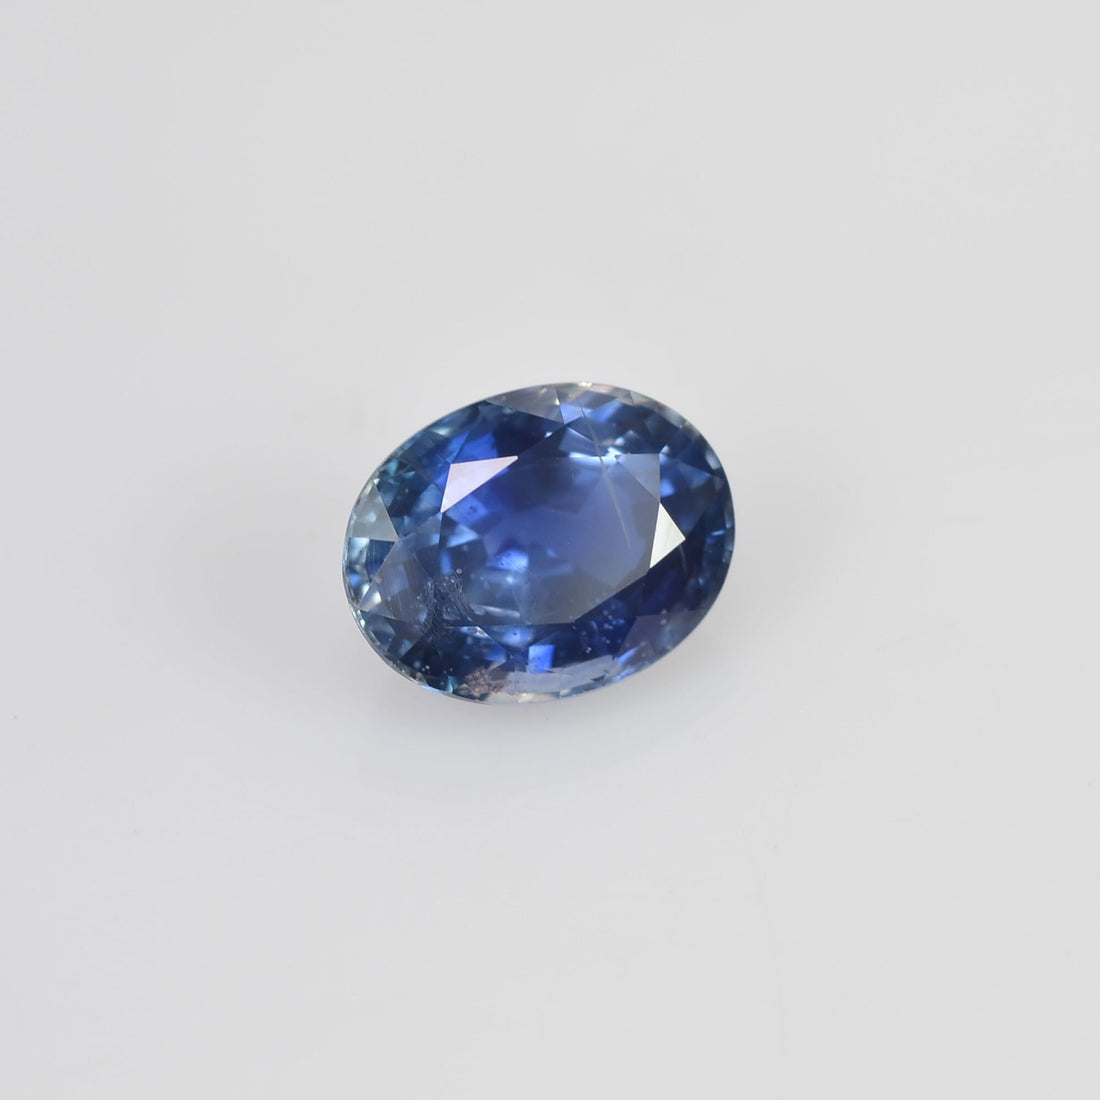 1.62 cts Natural Blue Sapphire Loose Gemstone Oval Cut